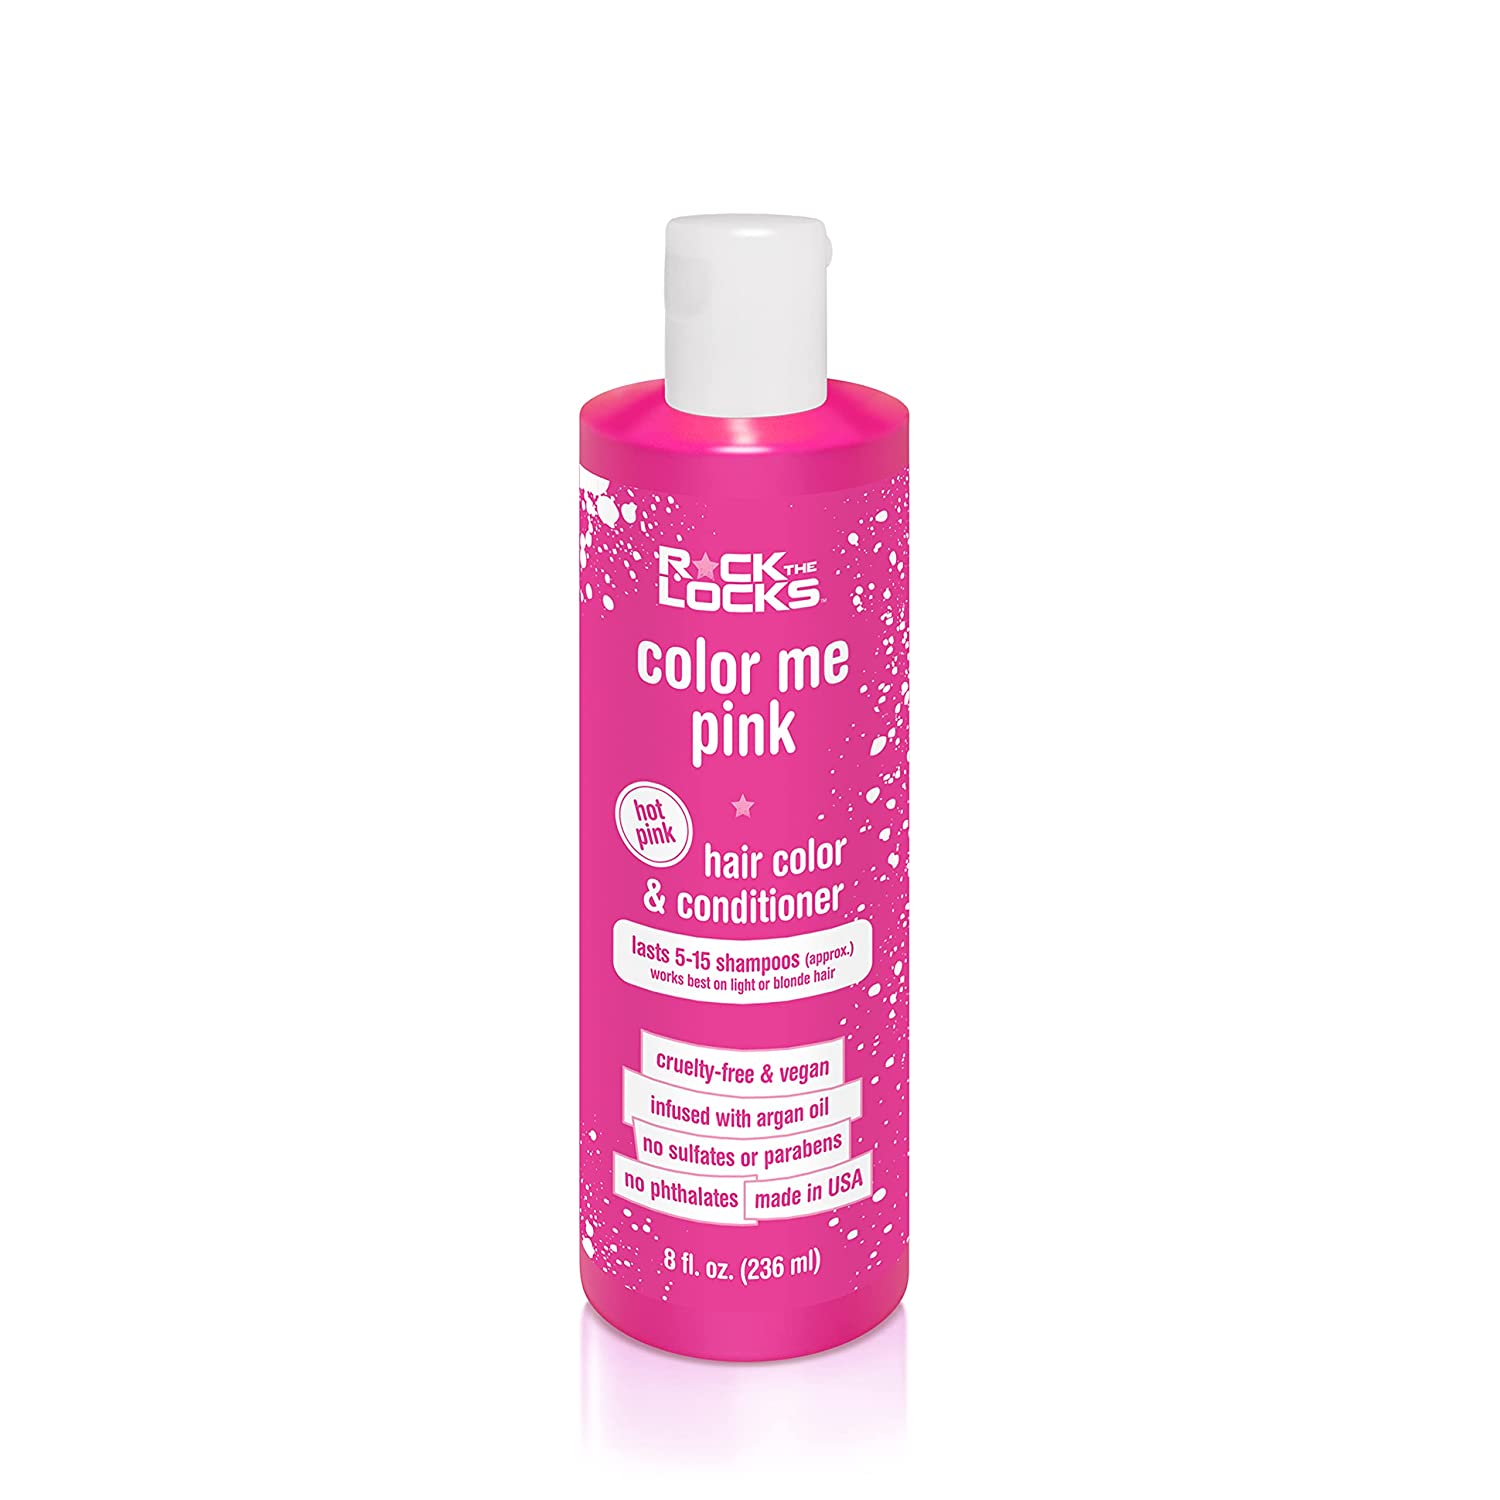 Rock the Locks | HAIR Color & Conditioner (All in One Bottle!) | Hot Pink Color | Argan Oil to Promo